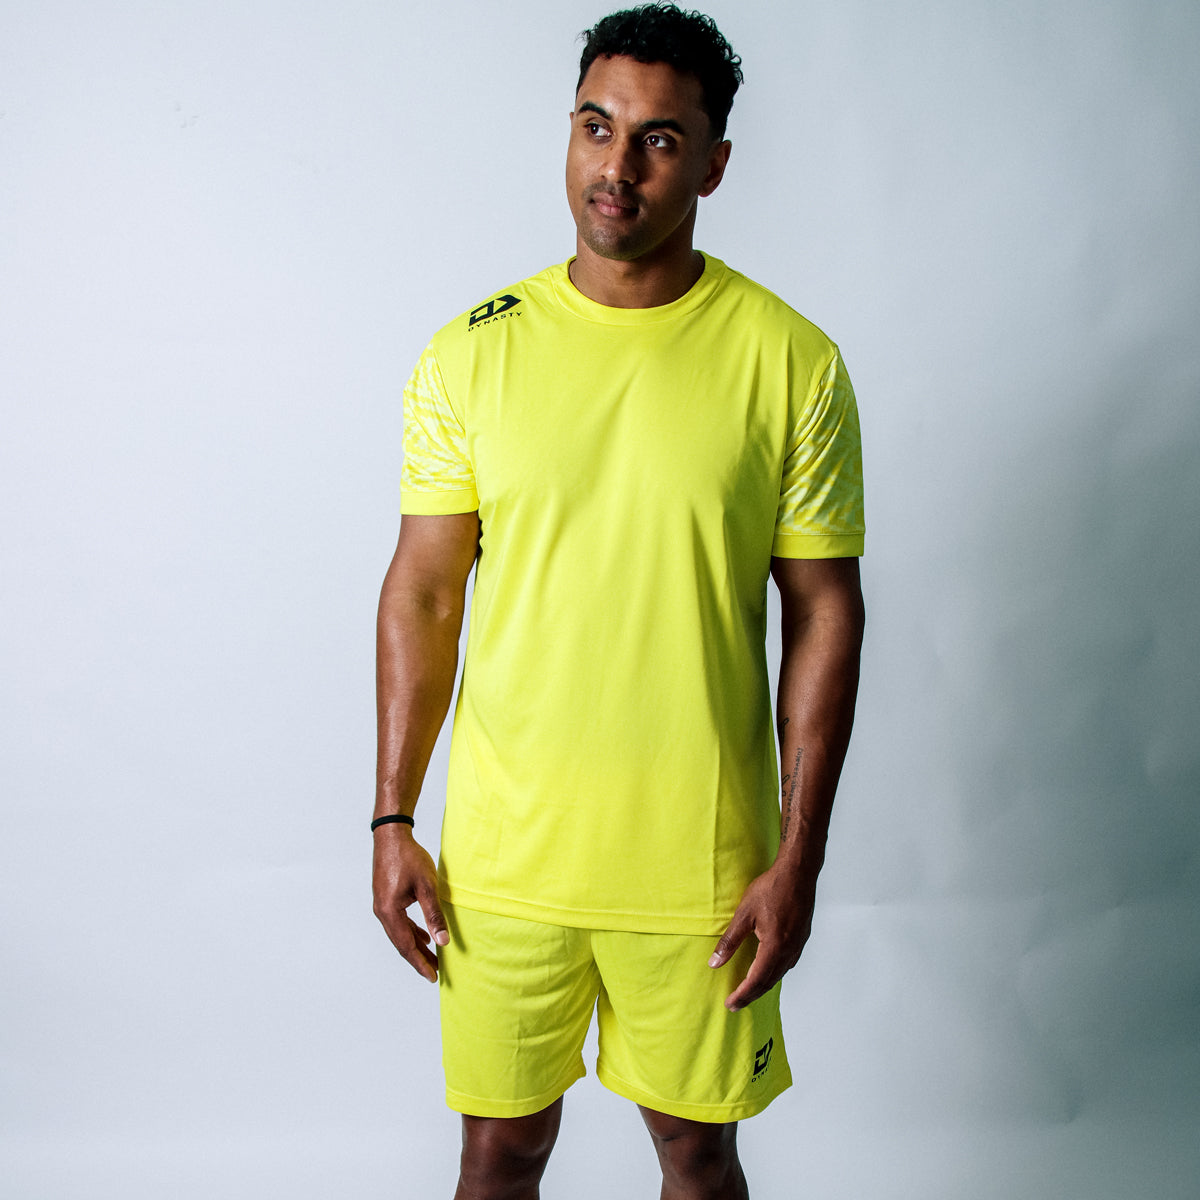 DS Adult Yellow Sport Short